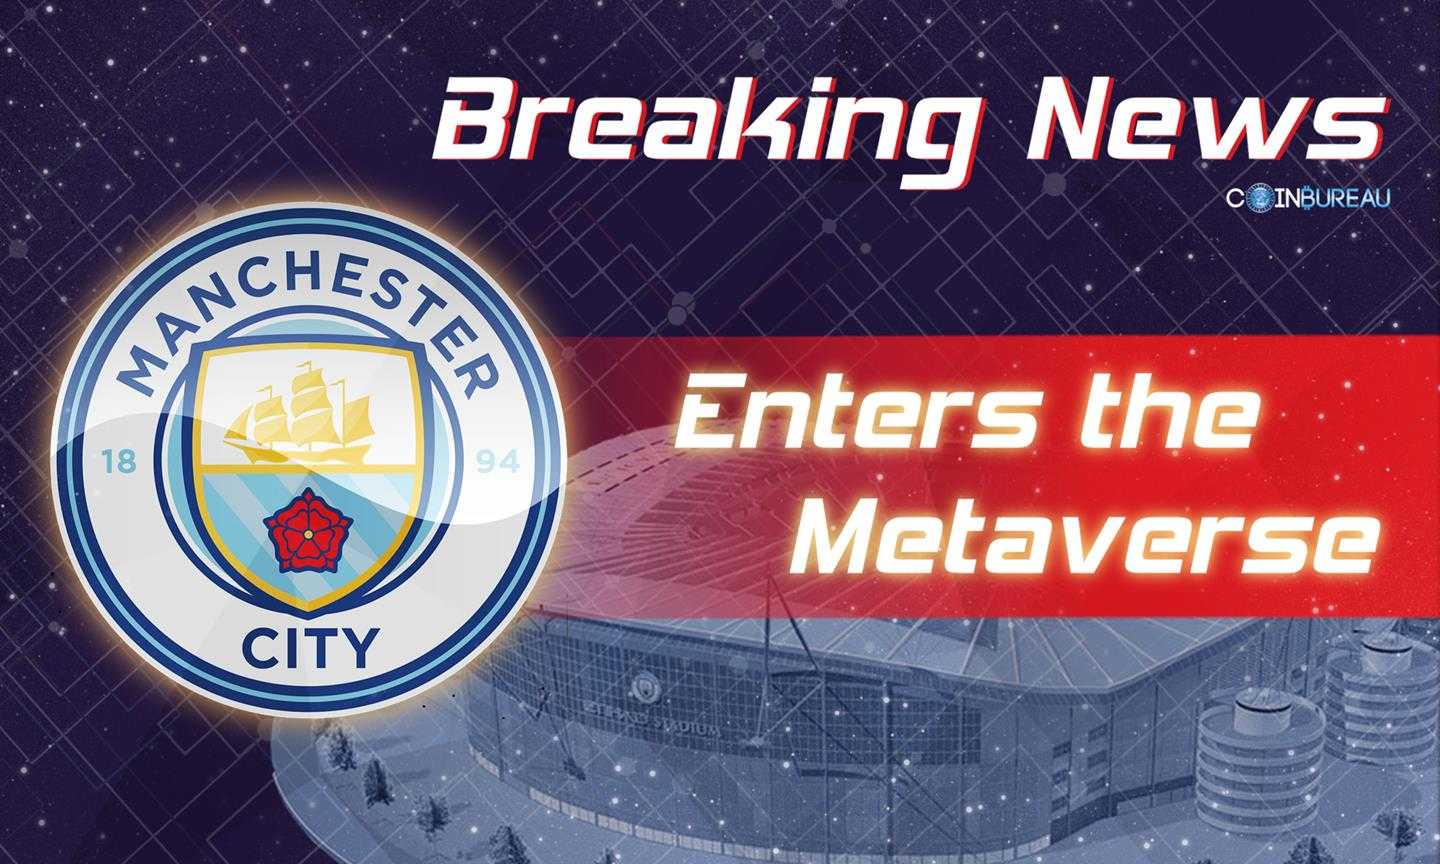 Manchester City Enters the Metaverse with a Replica of Etihad Stadium